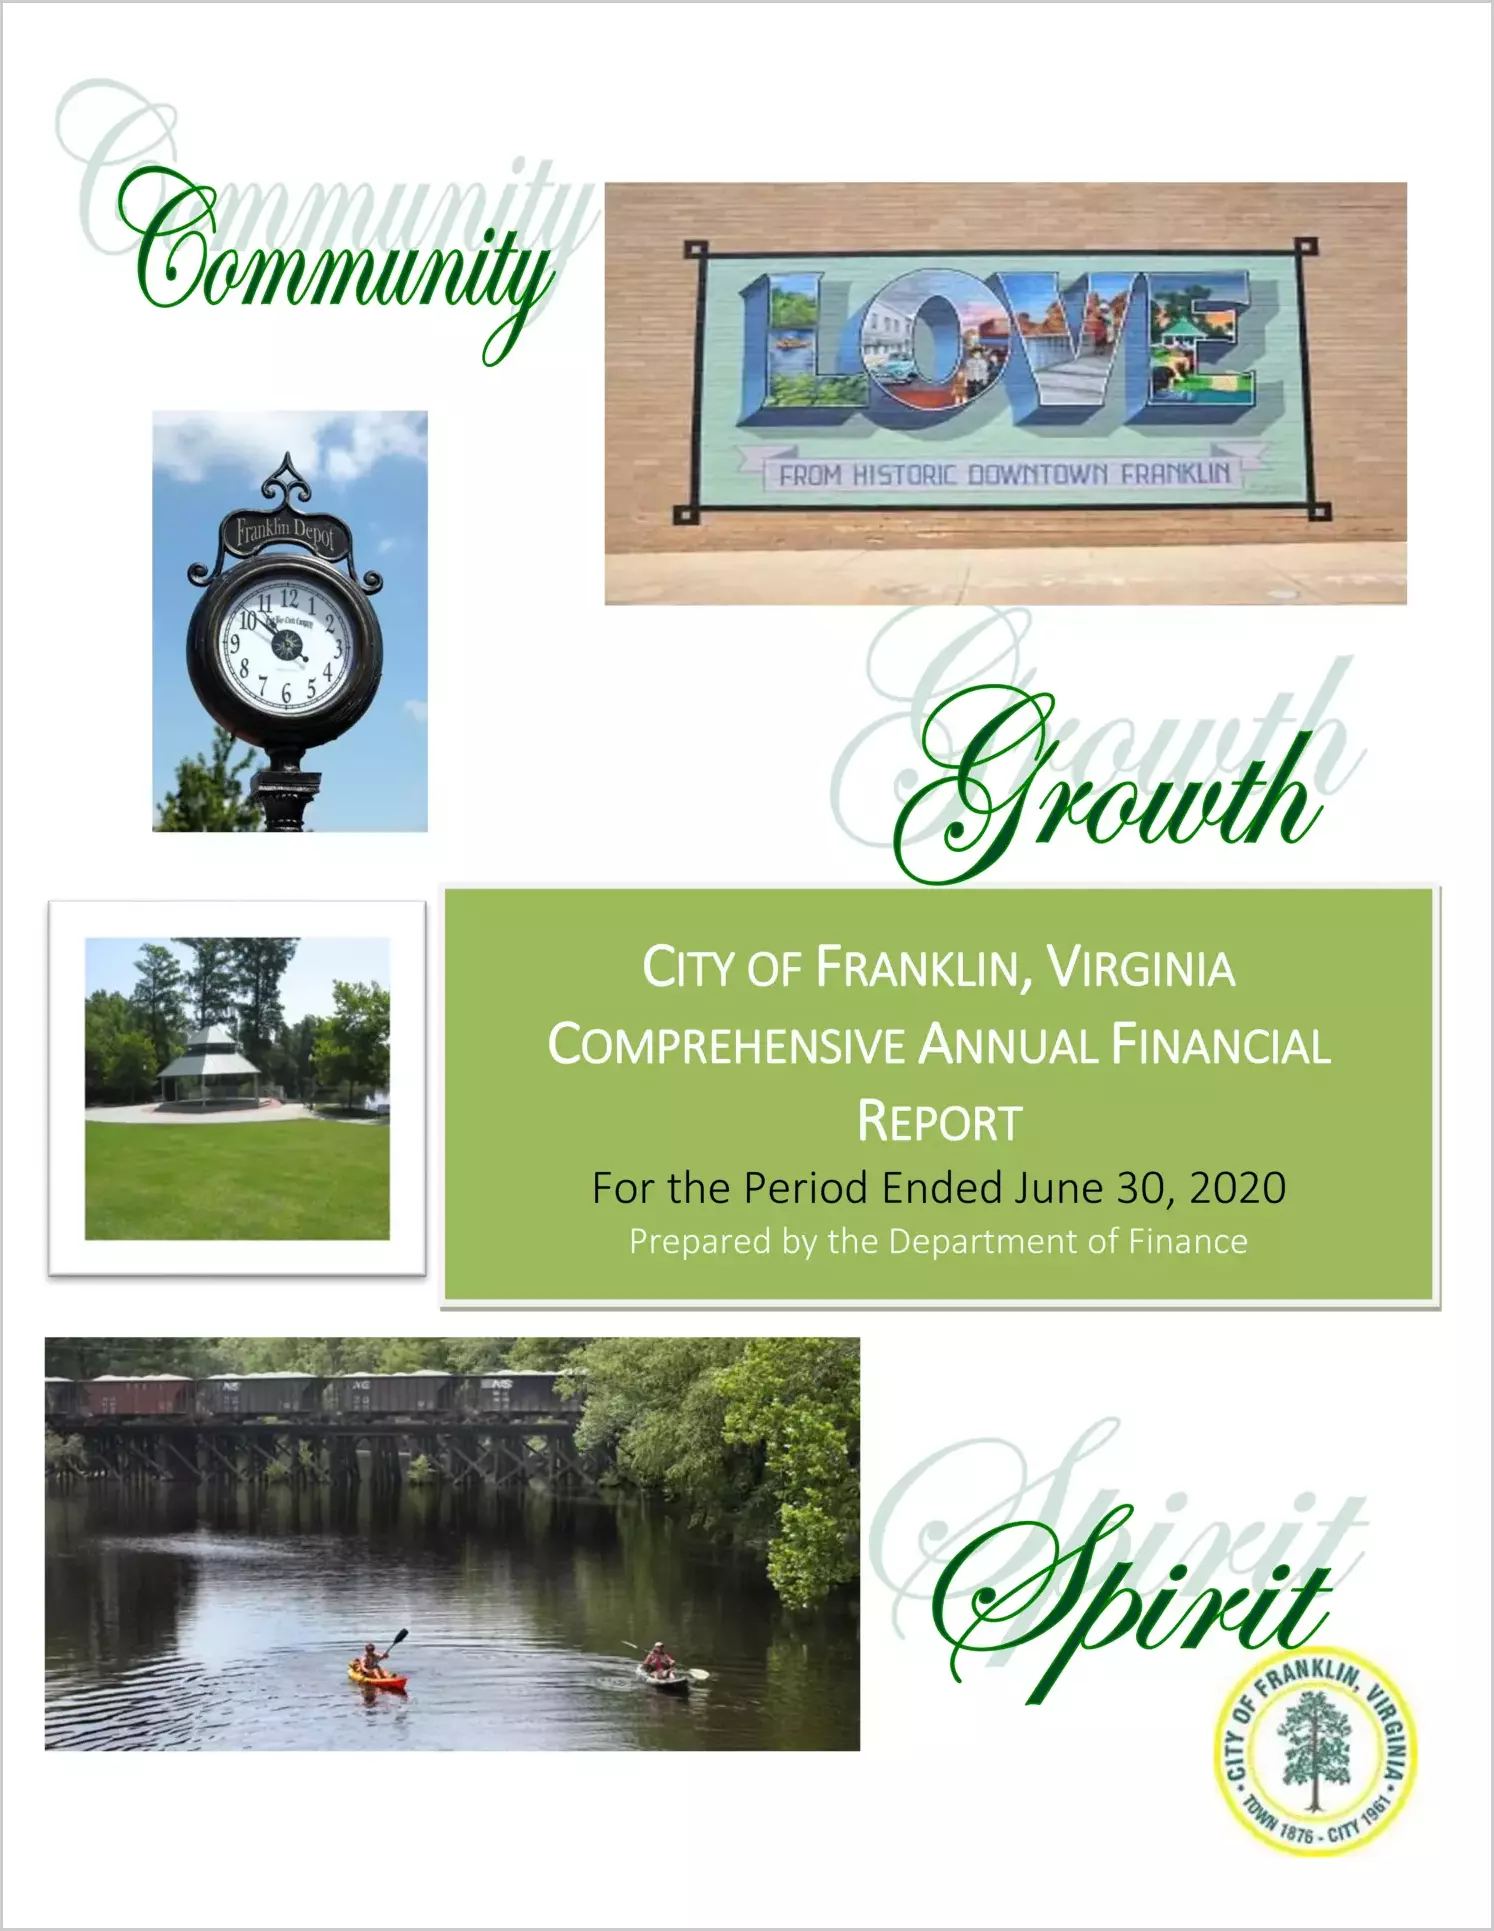 2020 Annual Financial Report for City of Franklin